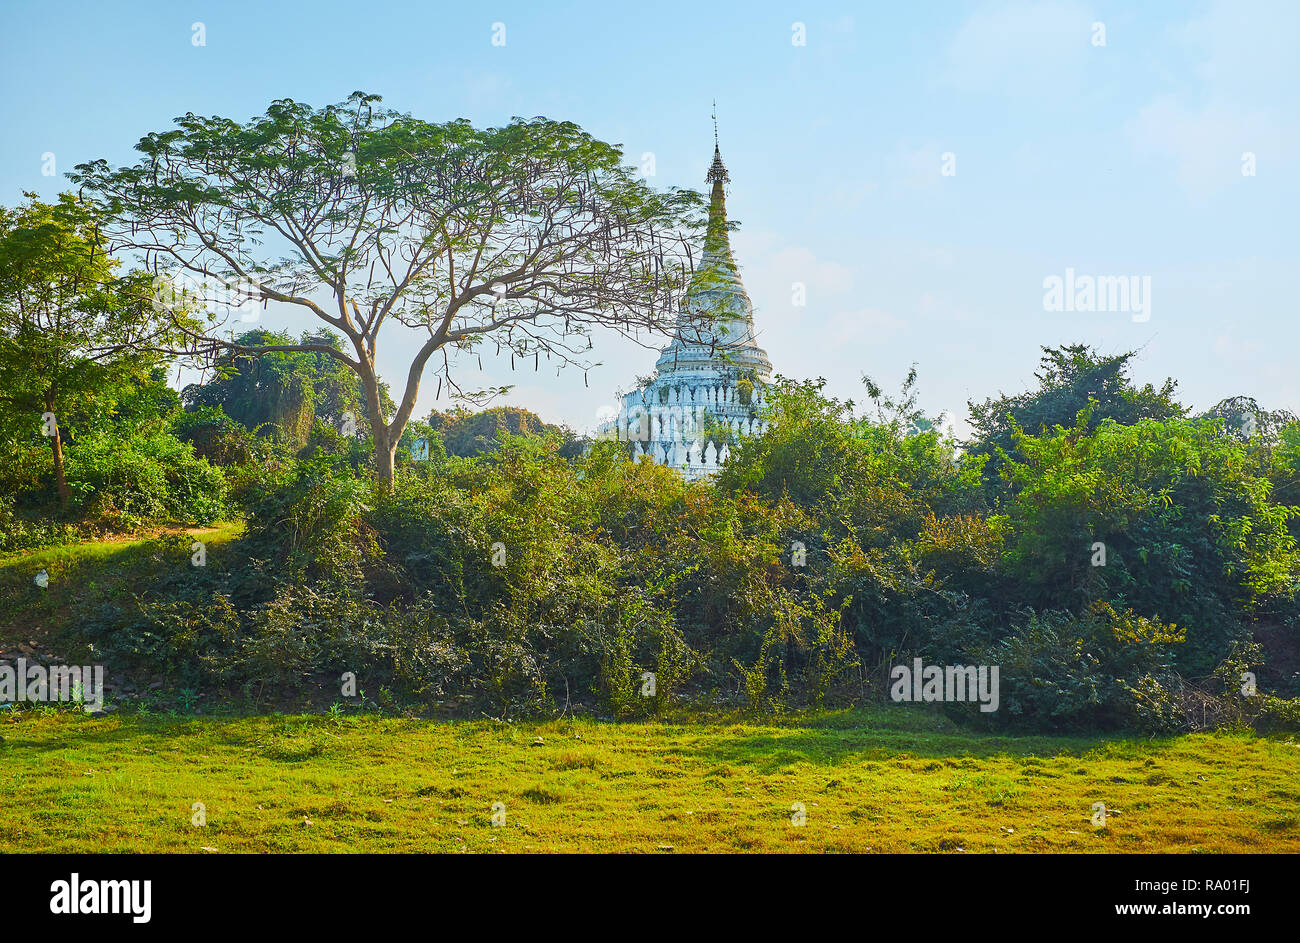 The ornate white stupa of Desada Taya Pagoda with old golden hti umbrella is seen through the thickets of greenery behind the spreading acacia catechu Stock Photo